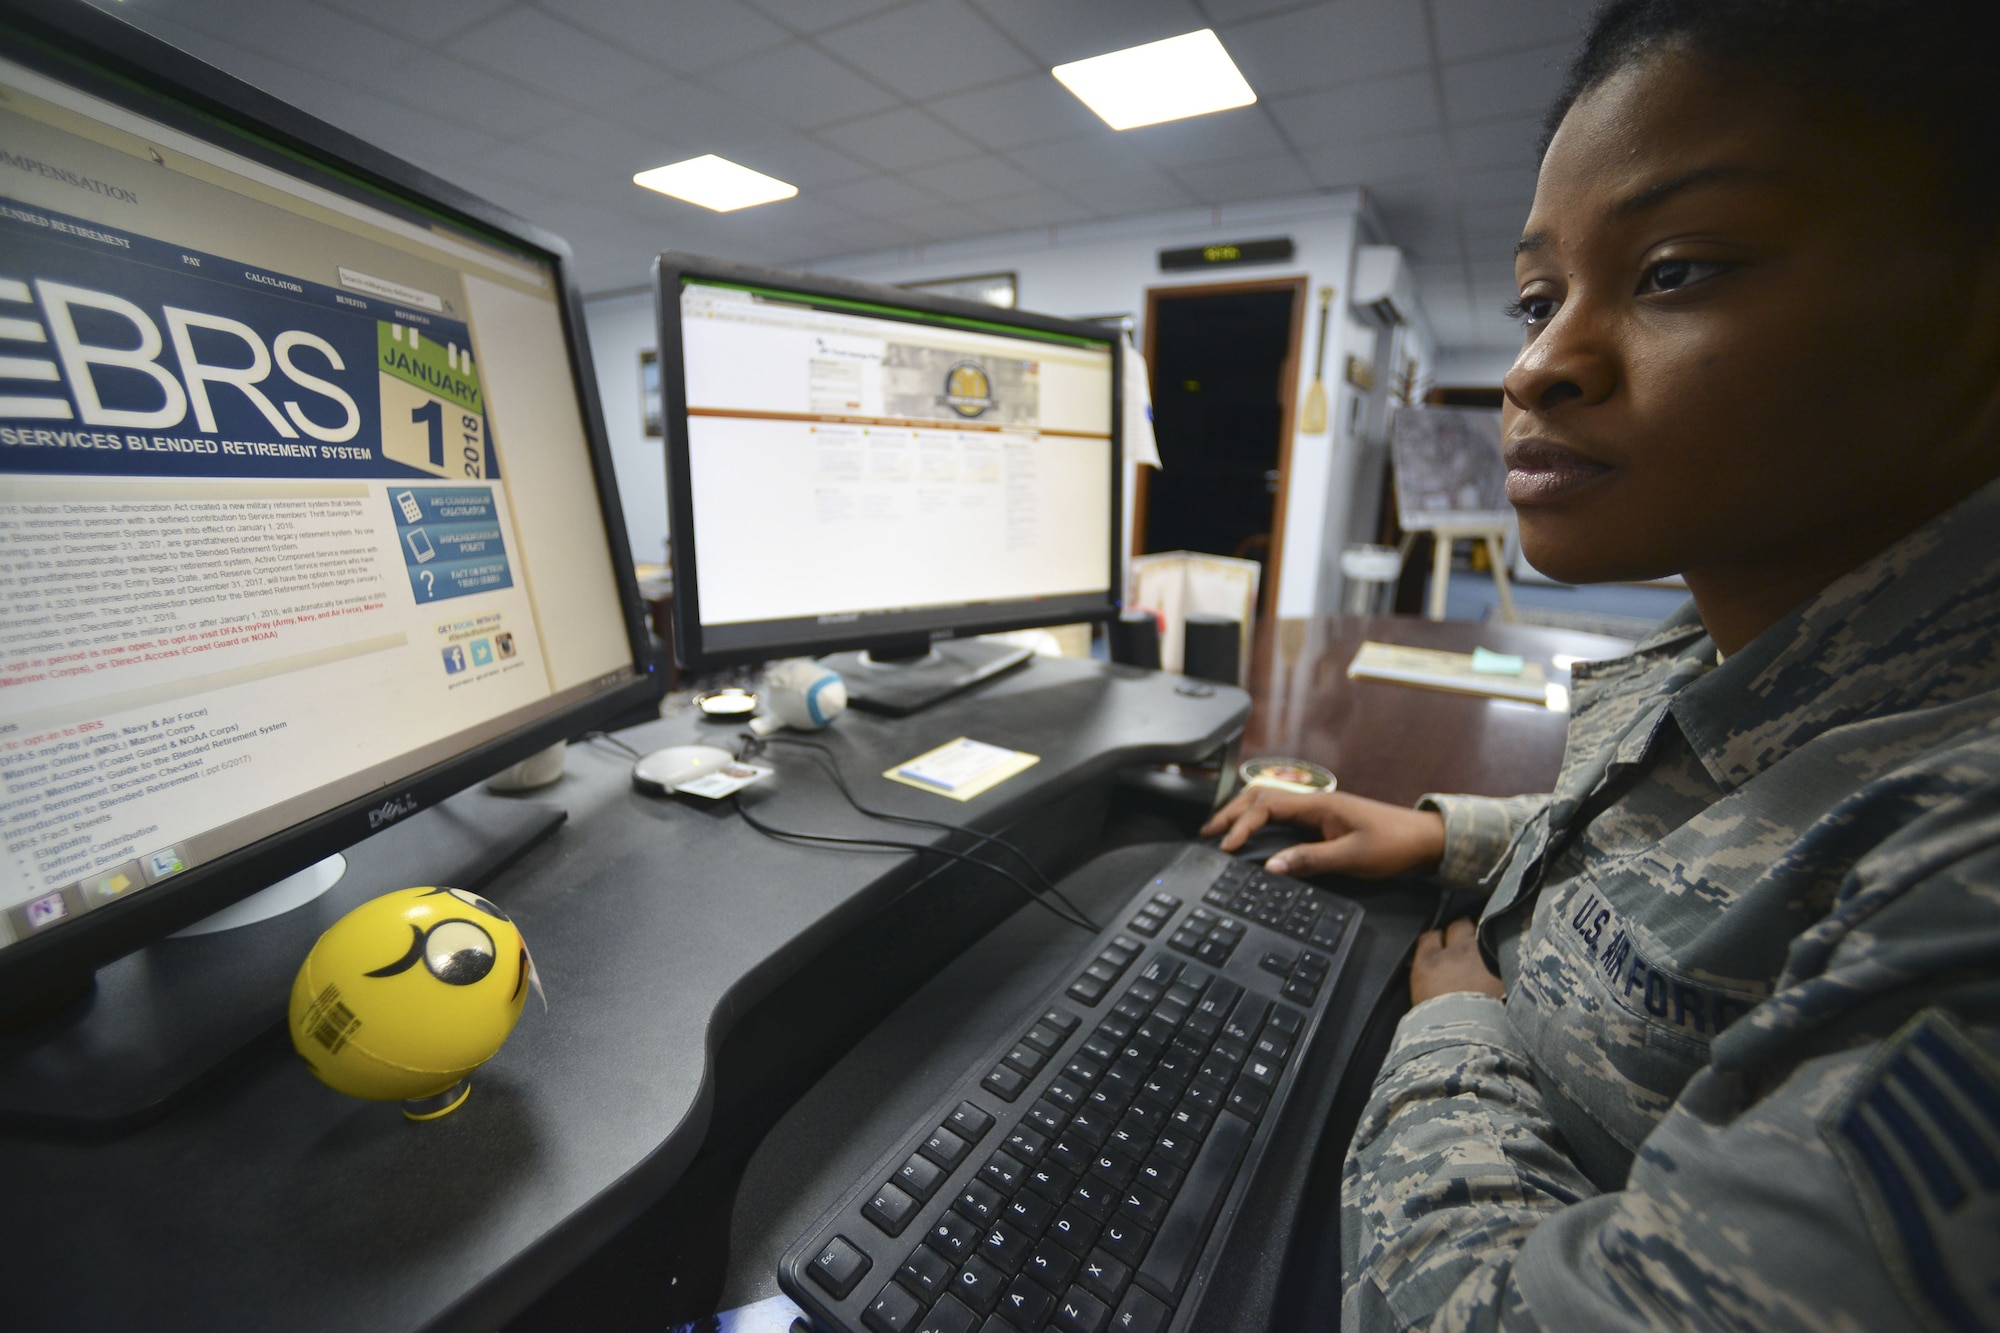 U.S. Air Force Staff Sgt. Dalia Theodule, 380th Air Expeditionary Wing command chief executive assistant, researches the Blended Retirement System on Al Dhafra Air Base, United Arab Emirates, Jan. 31, 2018. As of Jan. 1, 2018, nearly 1.6 million service members will have the option to opt into BRS or remain in the current “High-3” retirement system. (U.S. Air Force photo by Airman 1st Class D. Blake Browning)